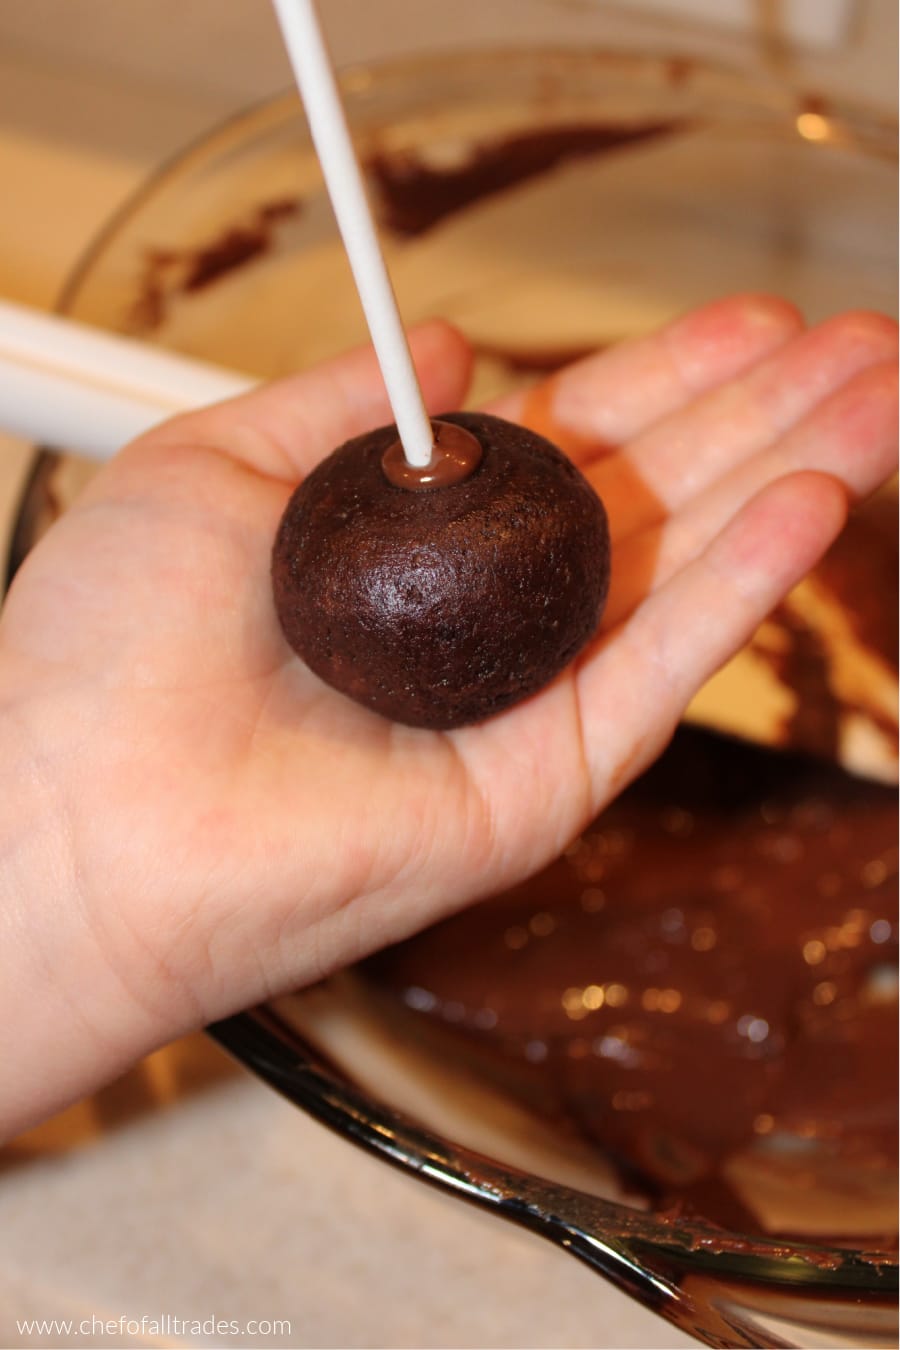 stick dipped in chocolate and inserted into the cake pop ball